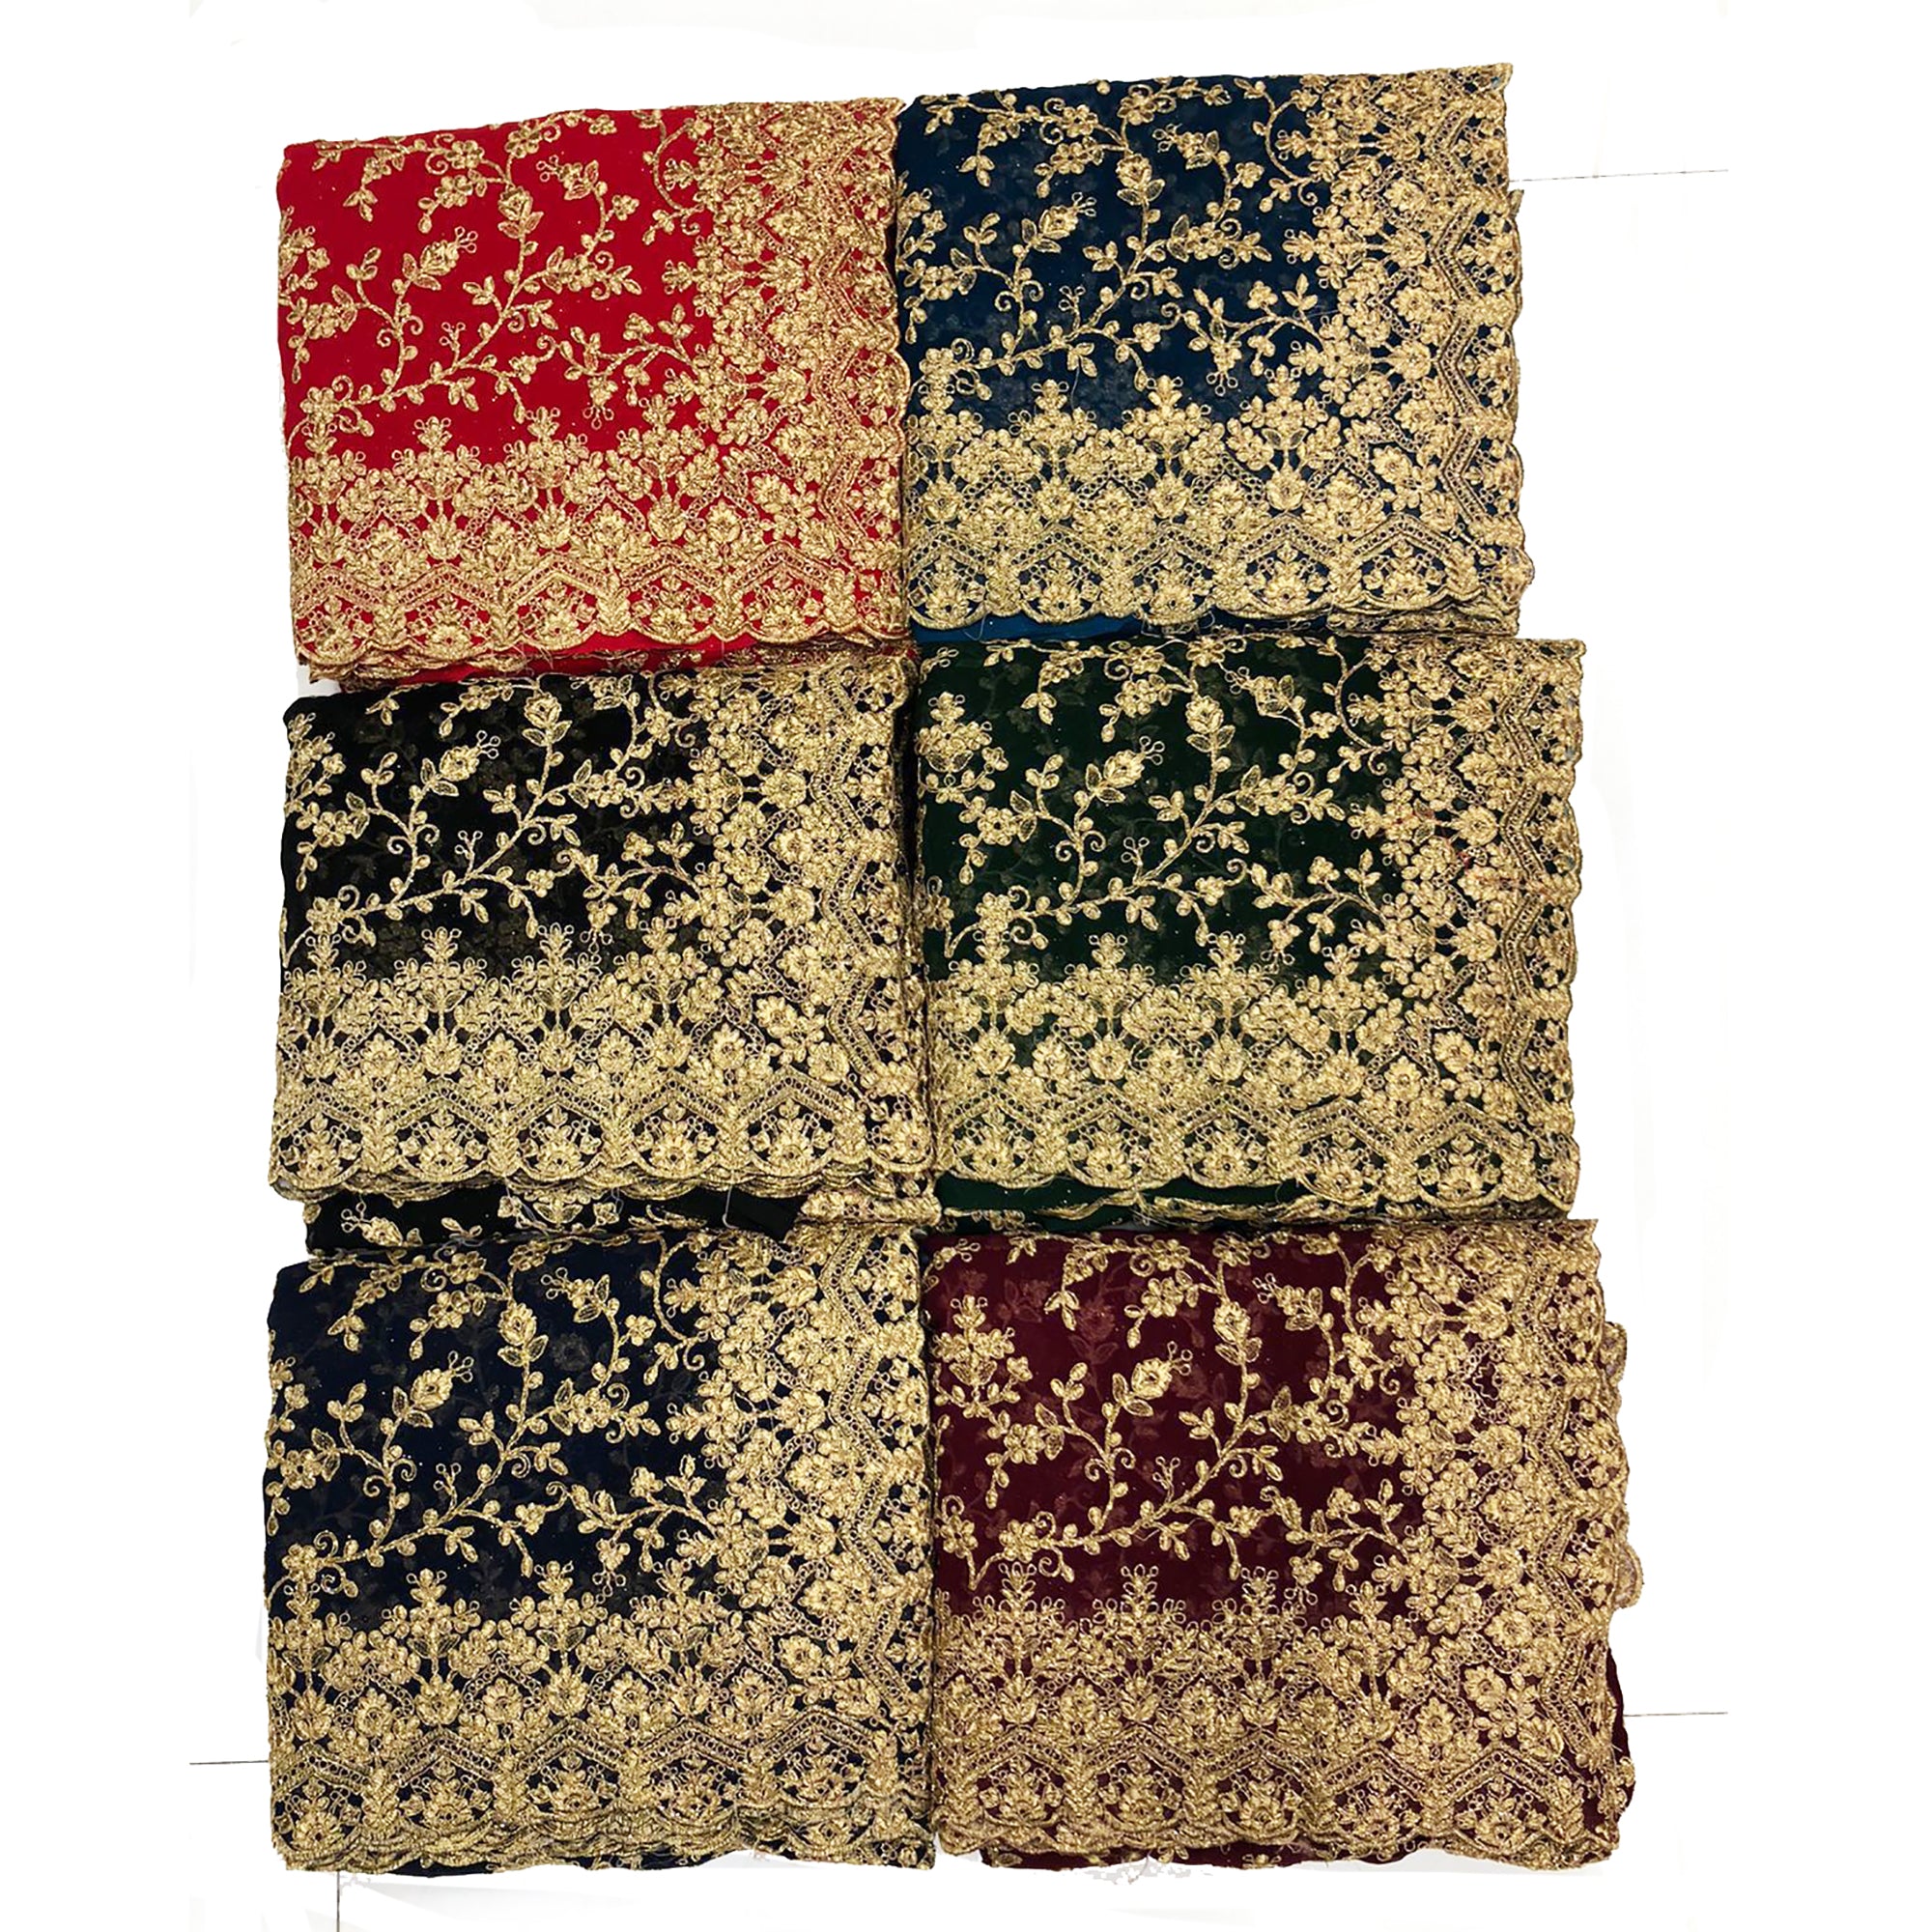 DT Georgette Sarees-Many Colors - Vintage India NYC